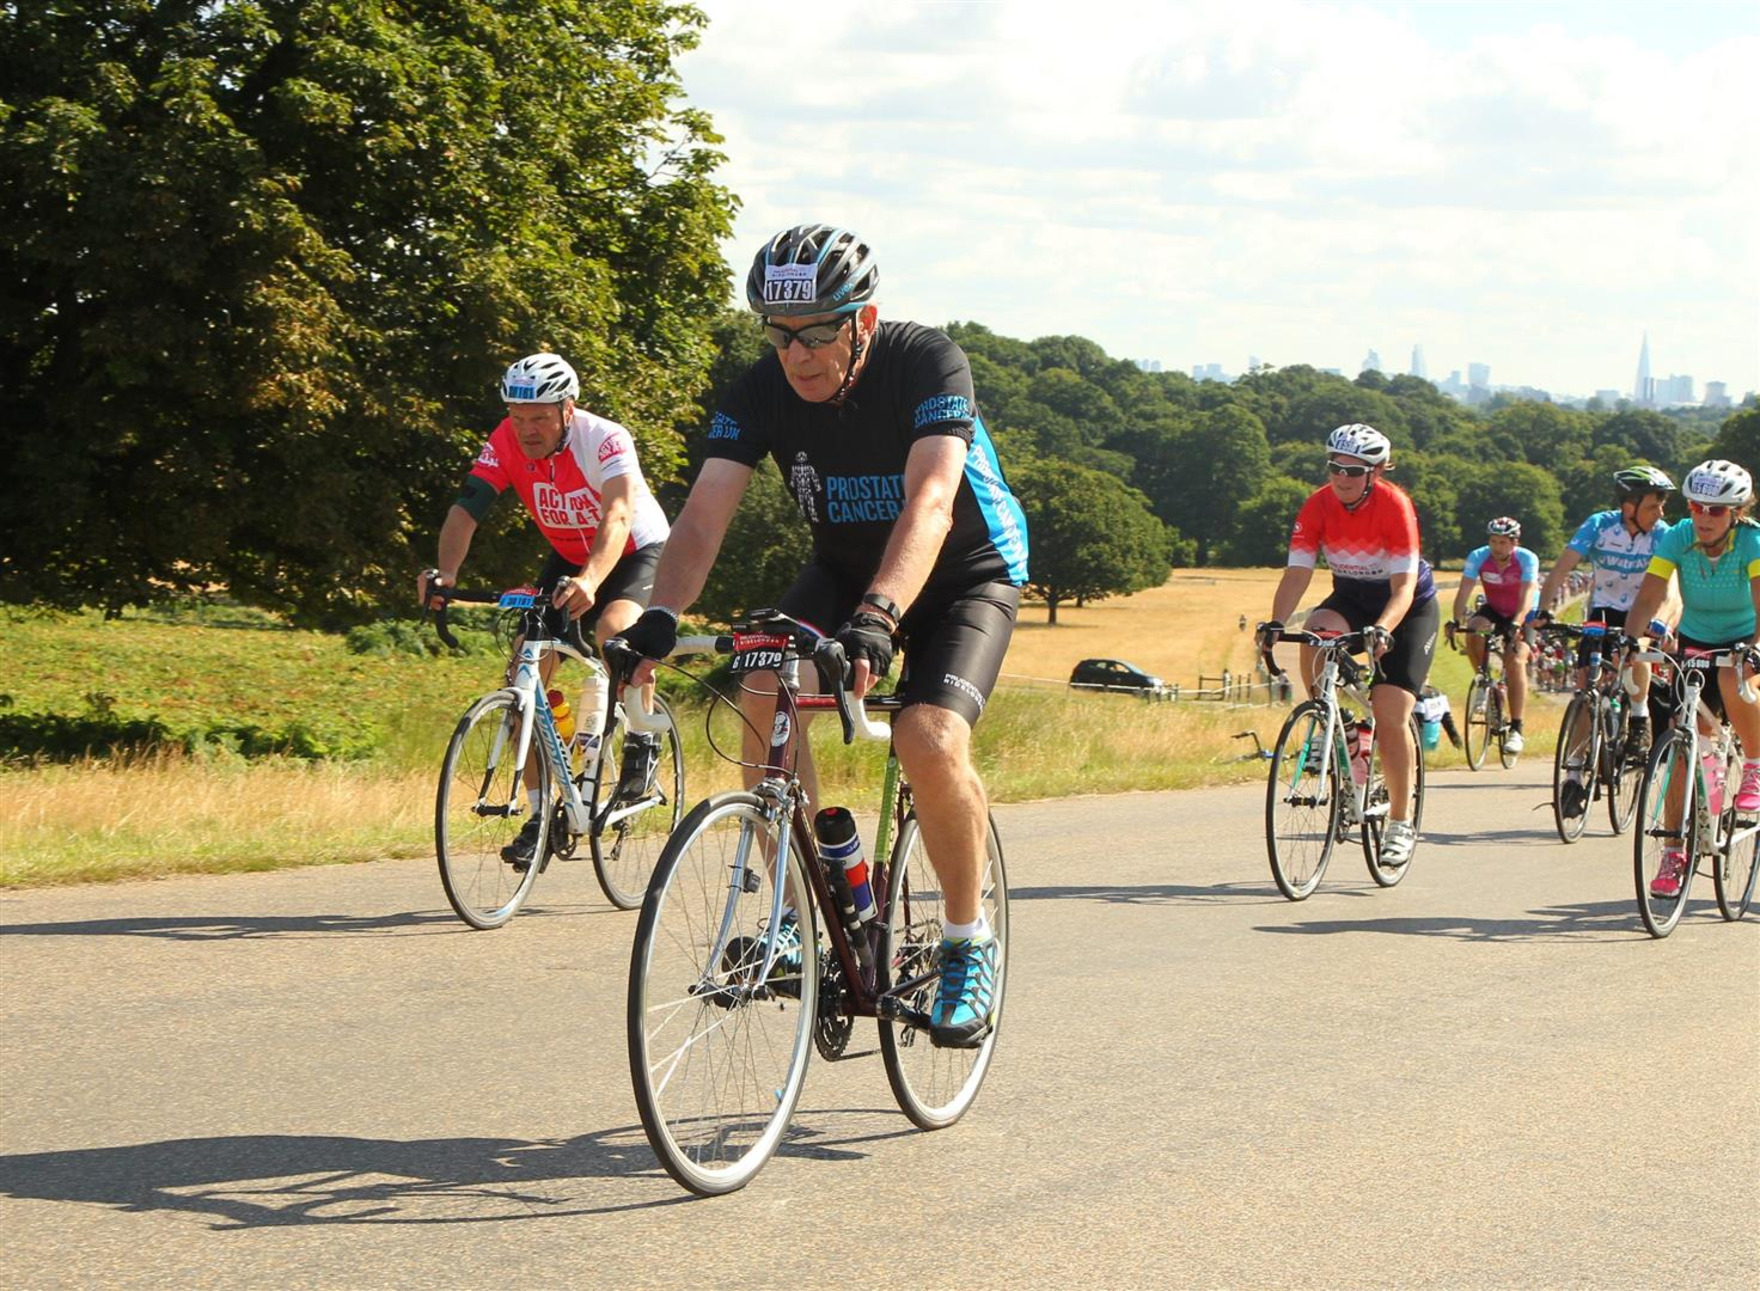 Cycling challenge for Prostate cancer awareness